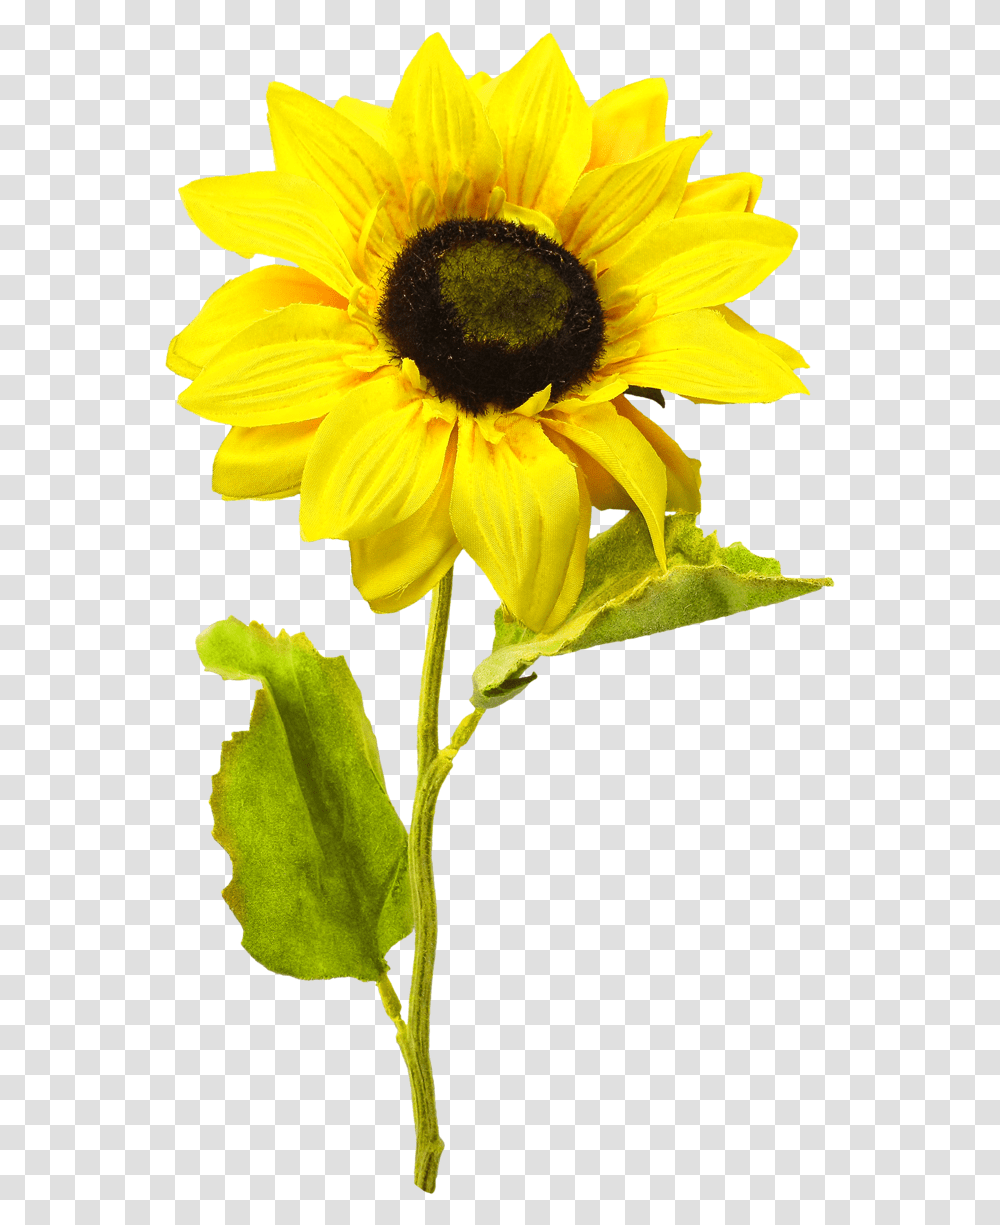 Sunflower Images Background Sunflower, Plant, Blossom, Daffodil, Honey Bee Transparent Png